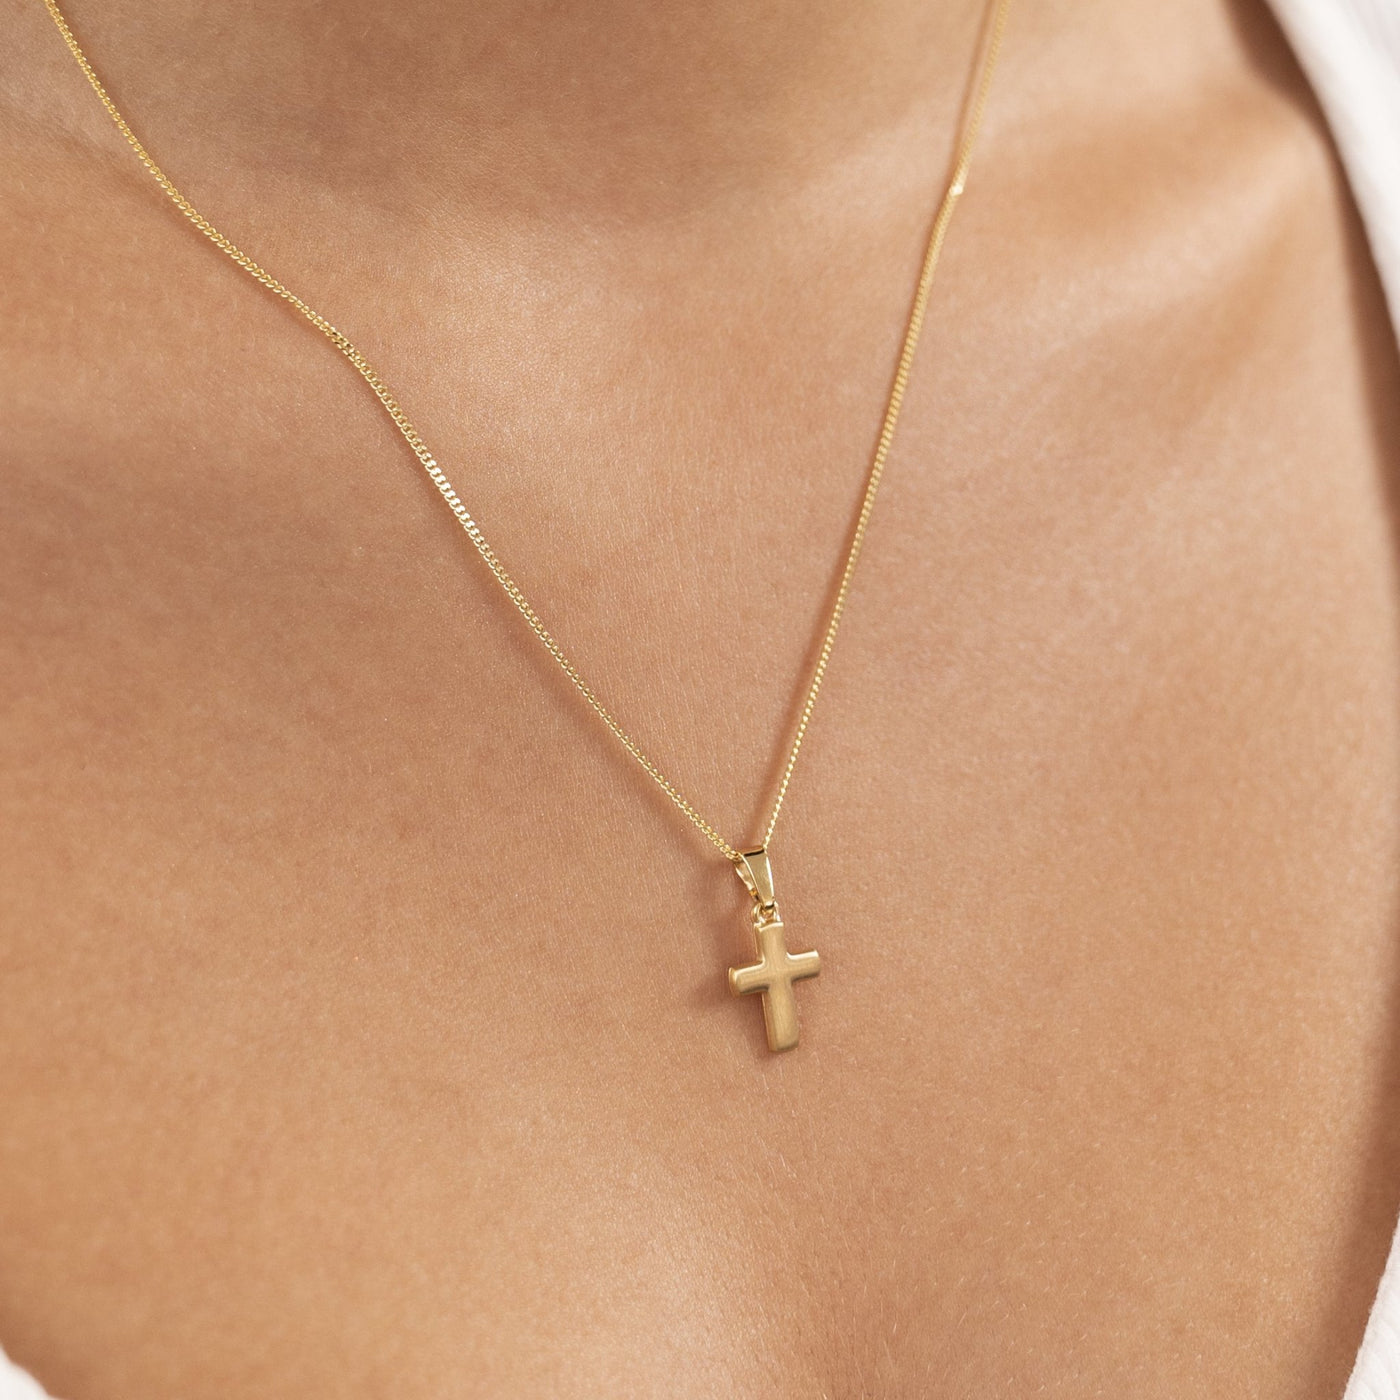 CROSS NECKLACE FROSTED 333 GOLD - IDENTIM®